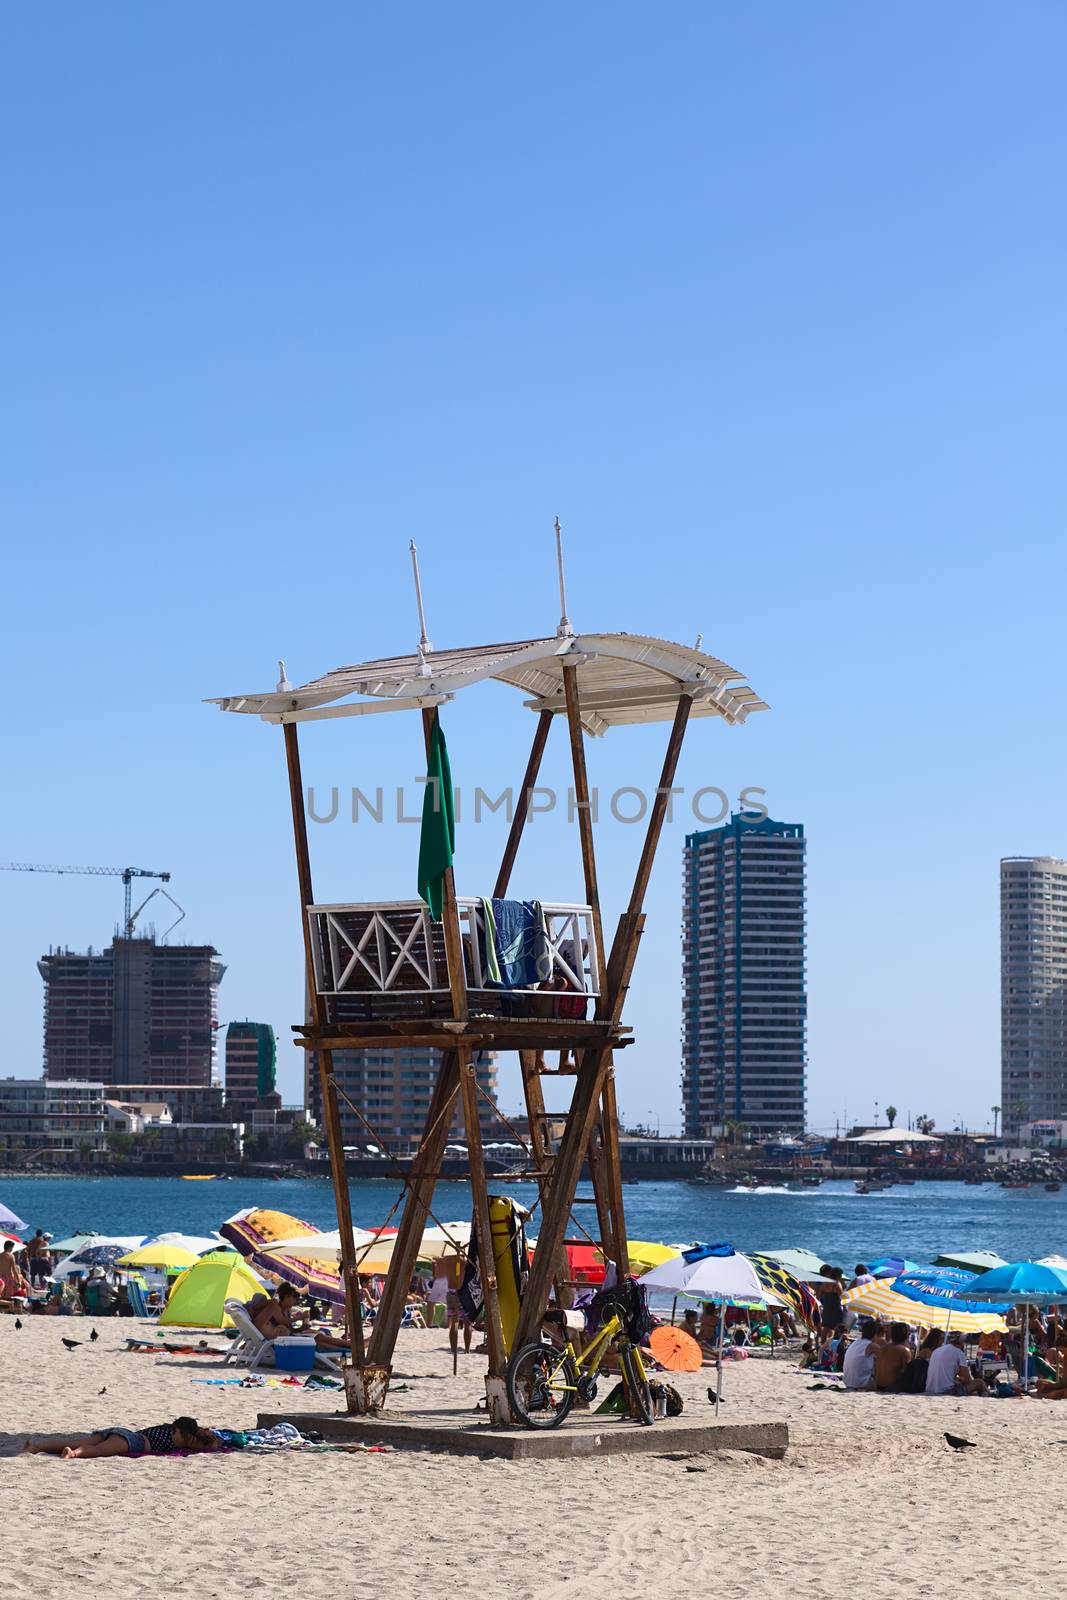 Lifeguard Watchtower on Cavancha Beach in Iquique, Chile by sven